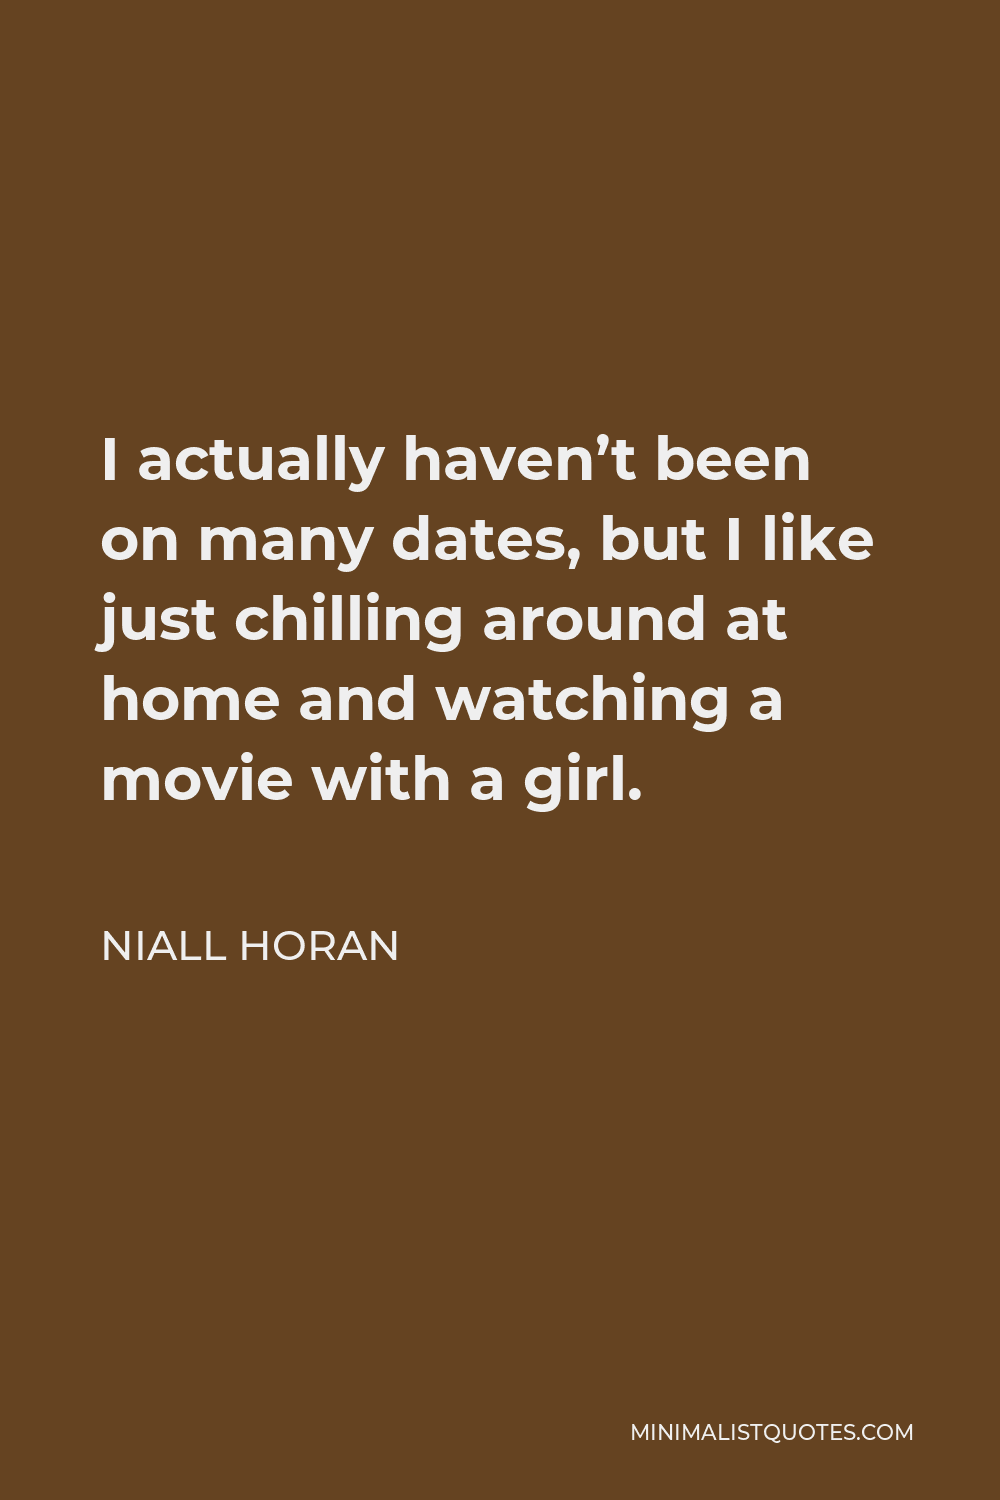 Niall Horan Quote - I actually haven’t been on many dates, but I like just chilling around at home and watching a movie with a girl.